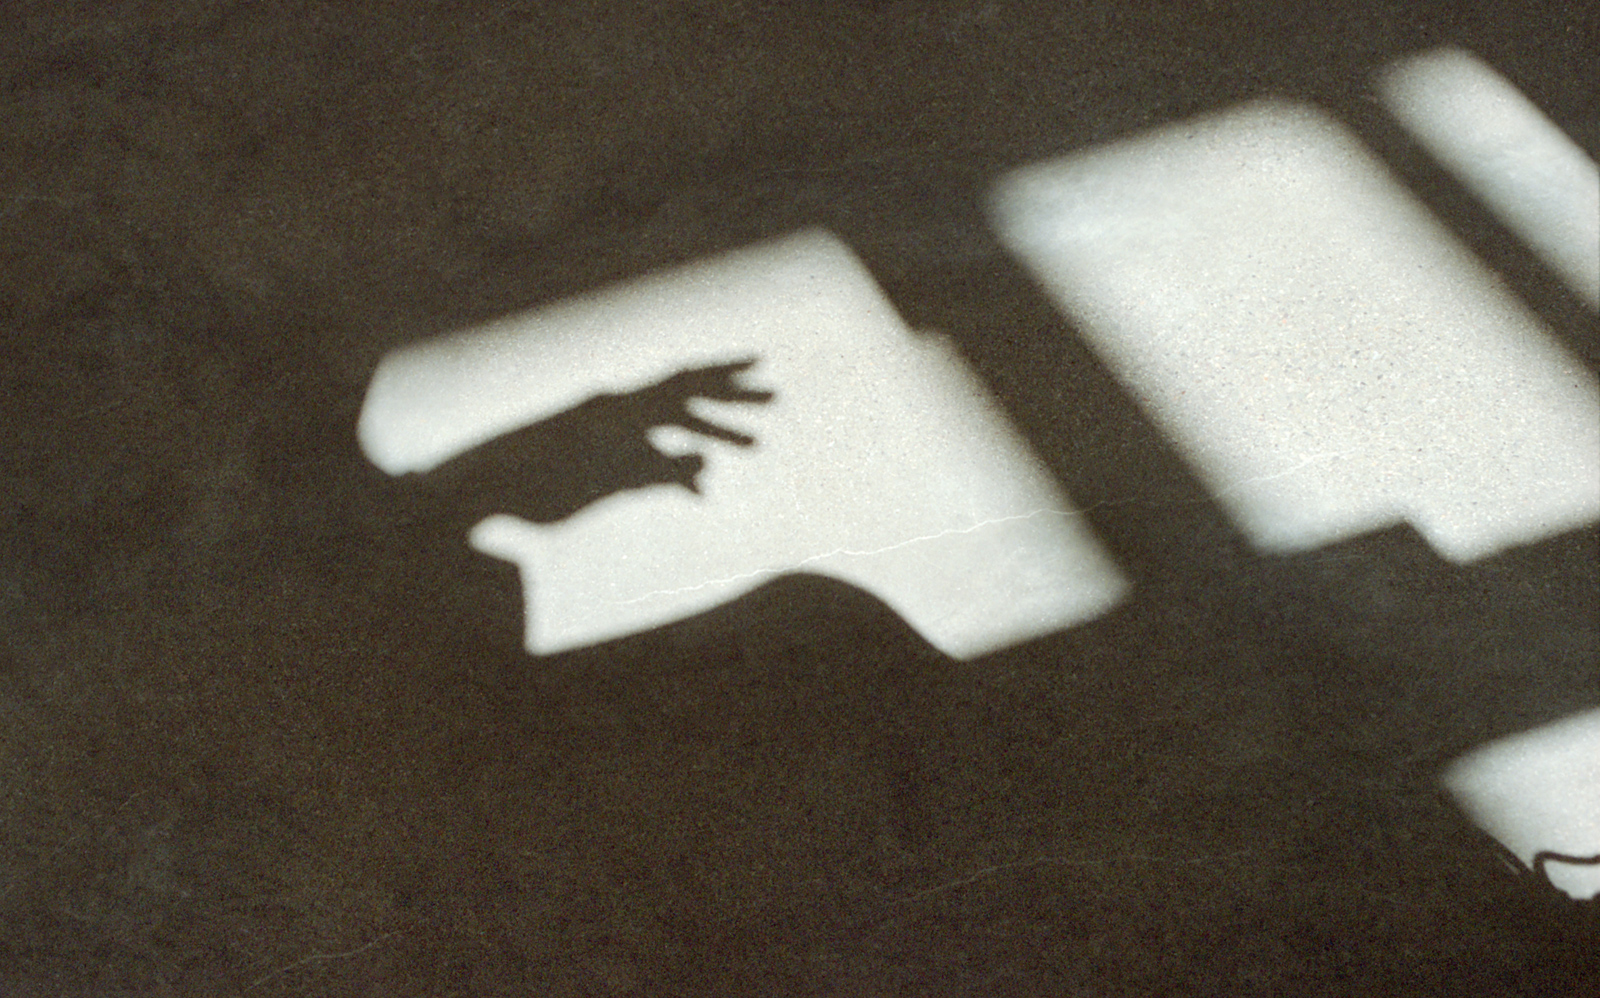 A shadow of a hand.